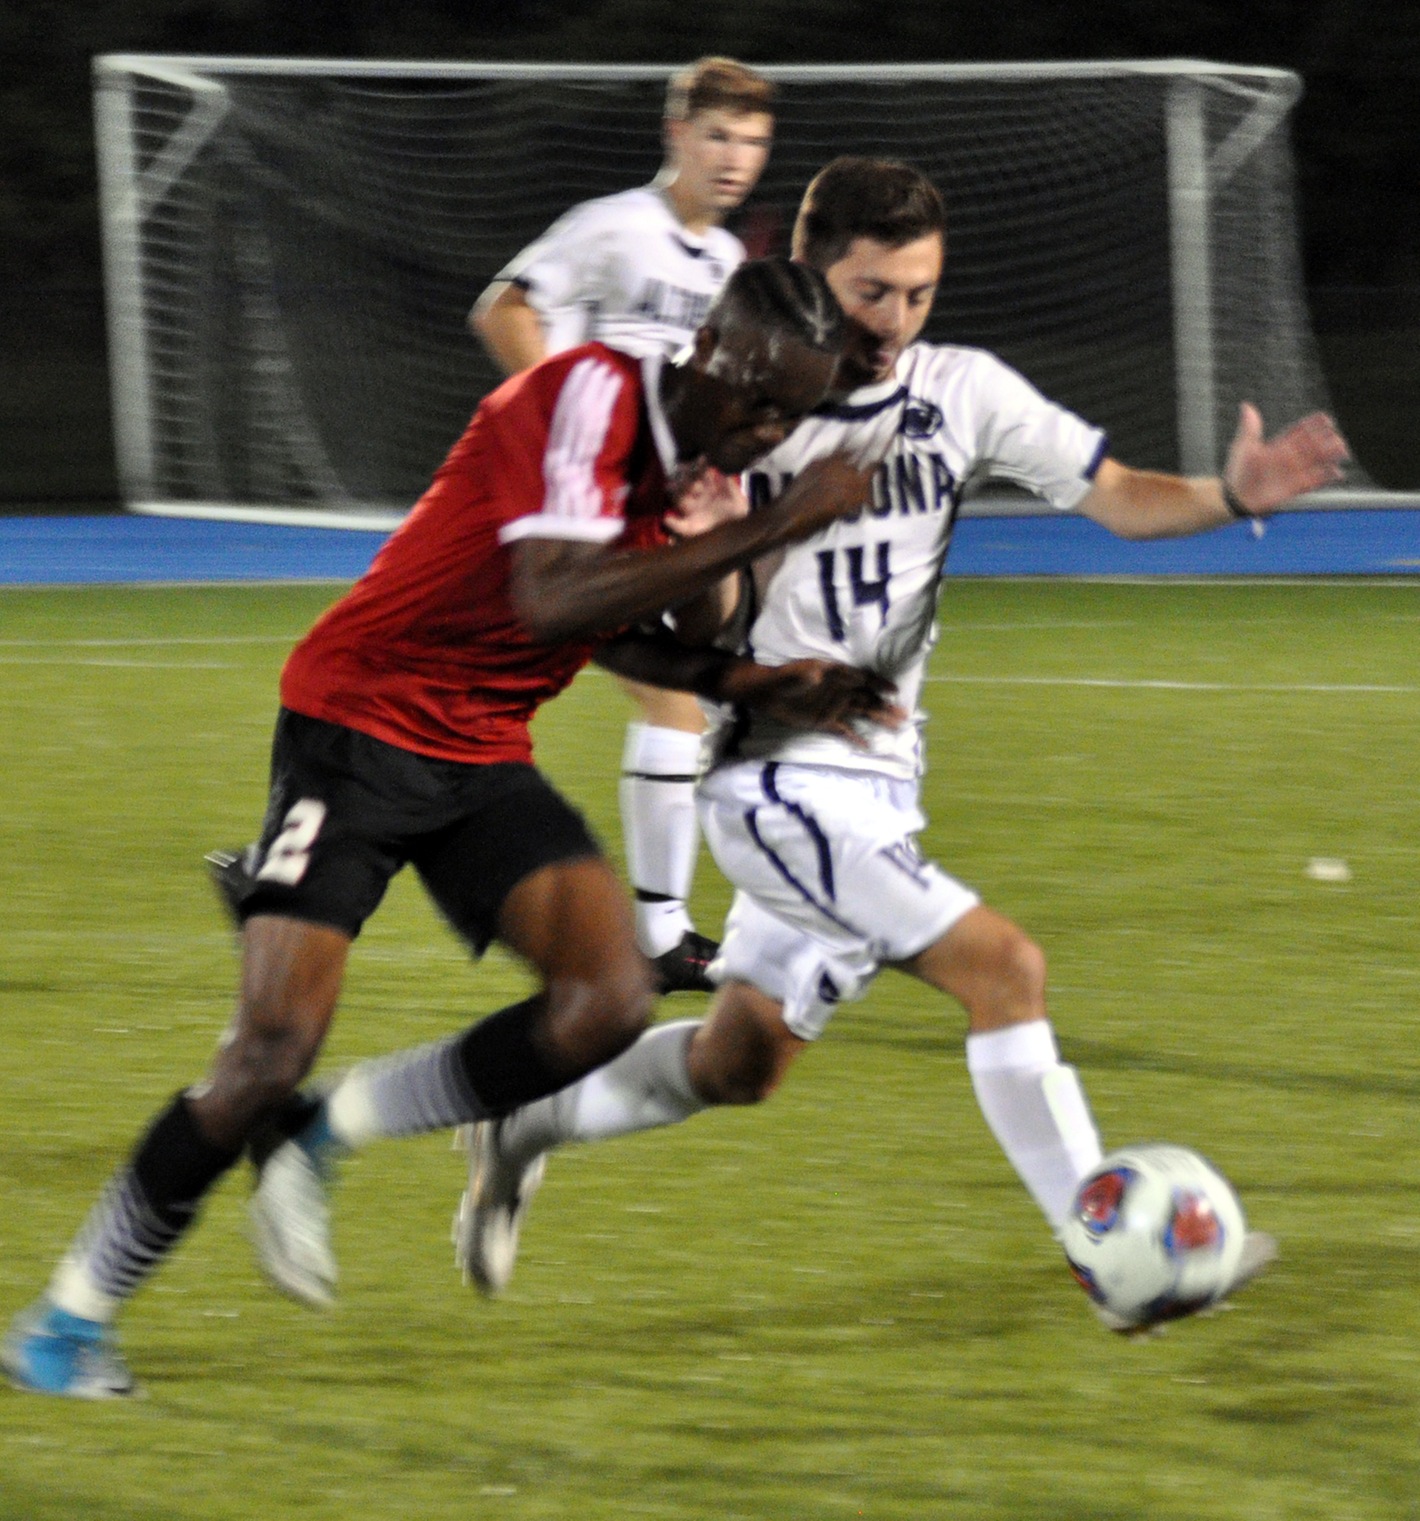 Photo (by Joel Nelson): Penn State Altoona senior midfielder Seth Murrelle battles for the ball with La Roche College's Dante Nicholas during the Lions' win at Spring Run Stadium on Tuesday evening.